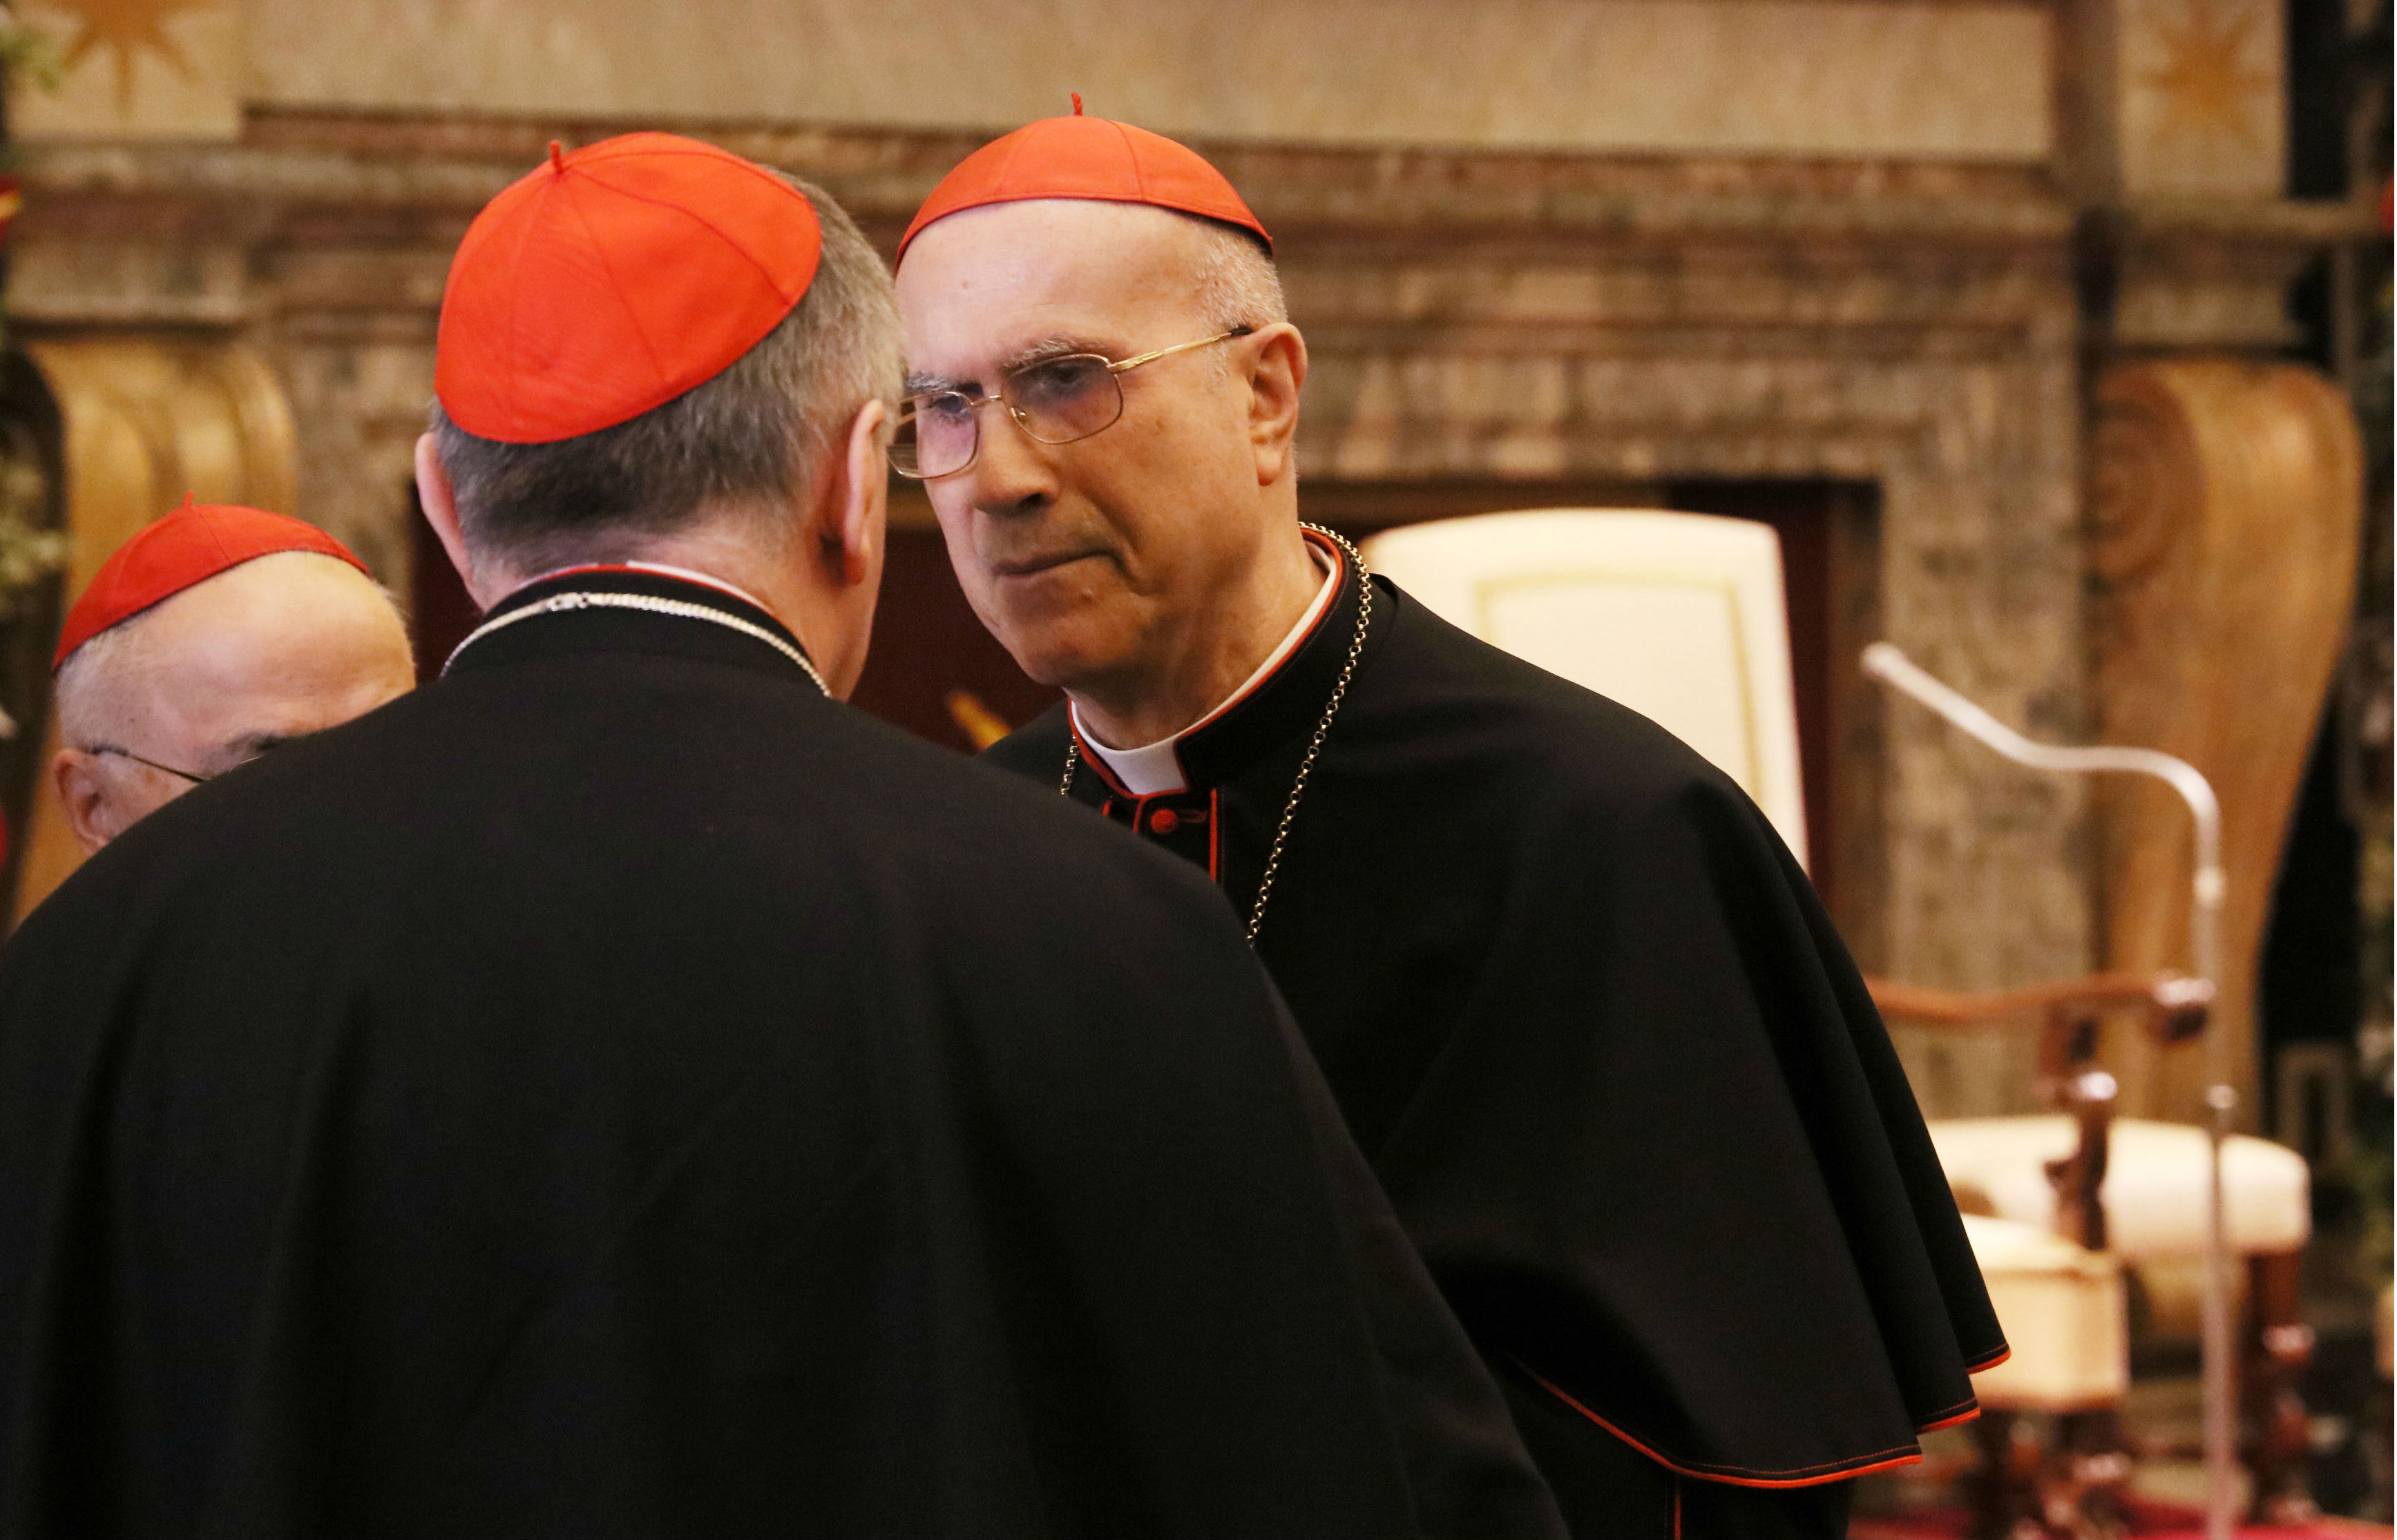 Vatican indicts former hospital officials for stealing money to refurbish cardinal's flat 